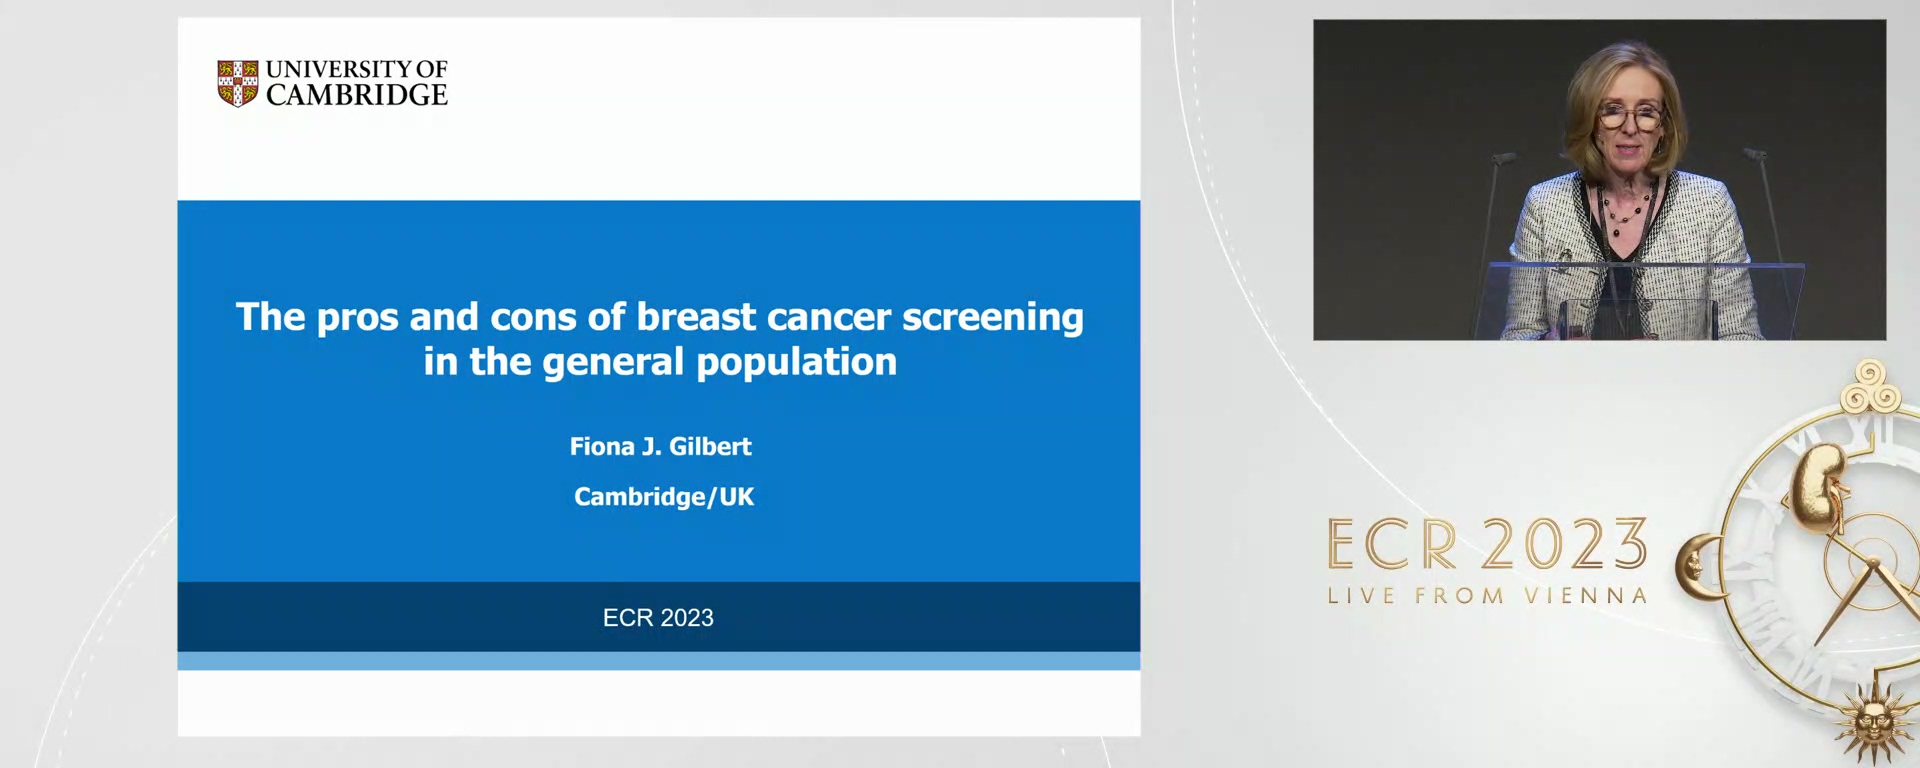 The pros and cons of breast cancer screening in the general population